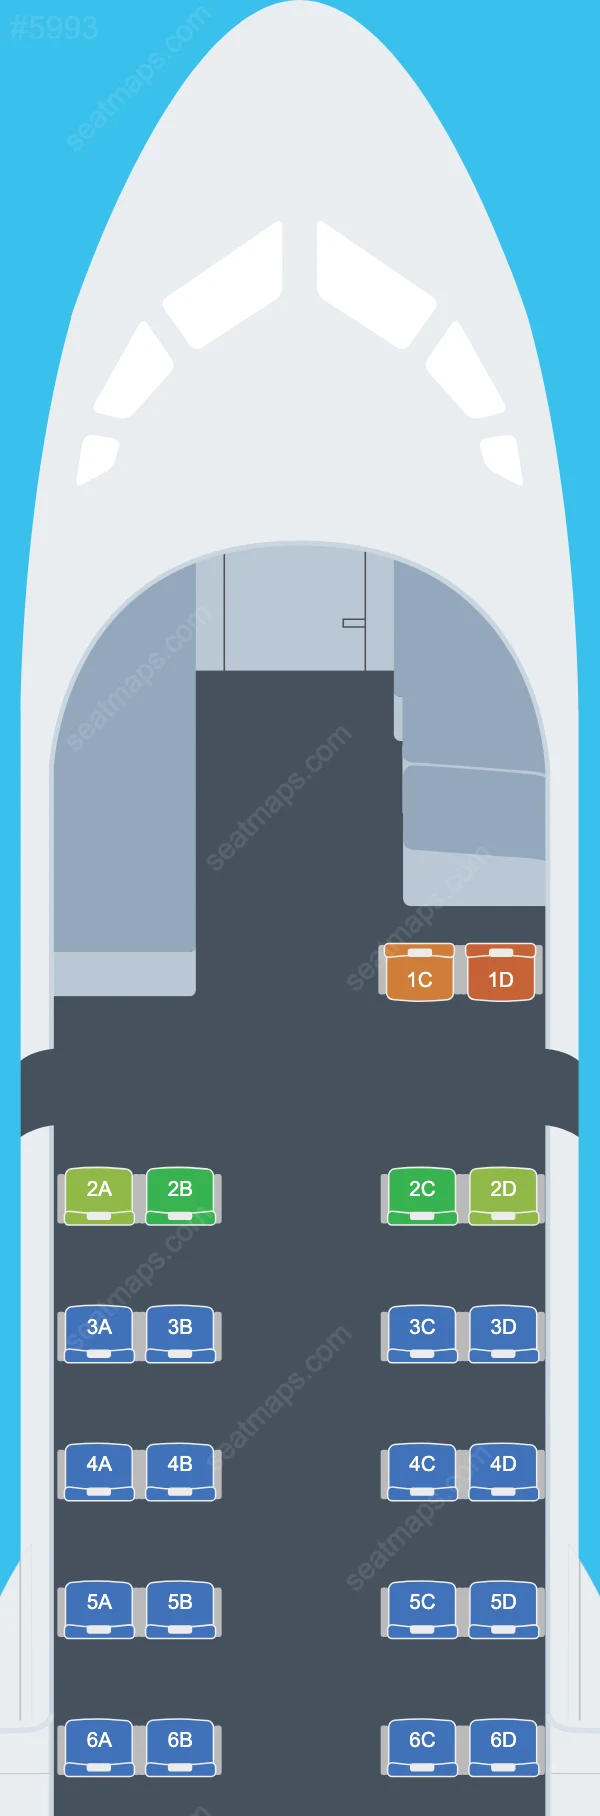 Olympic Air ATR 42-600 seatmap preview